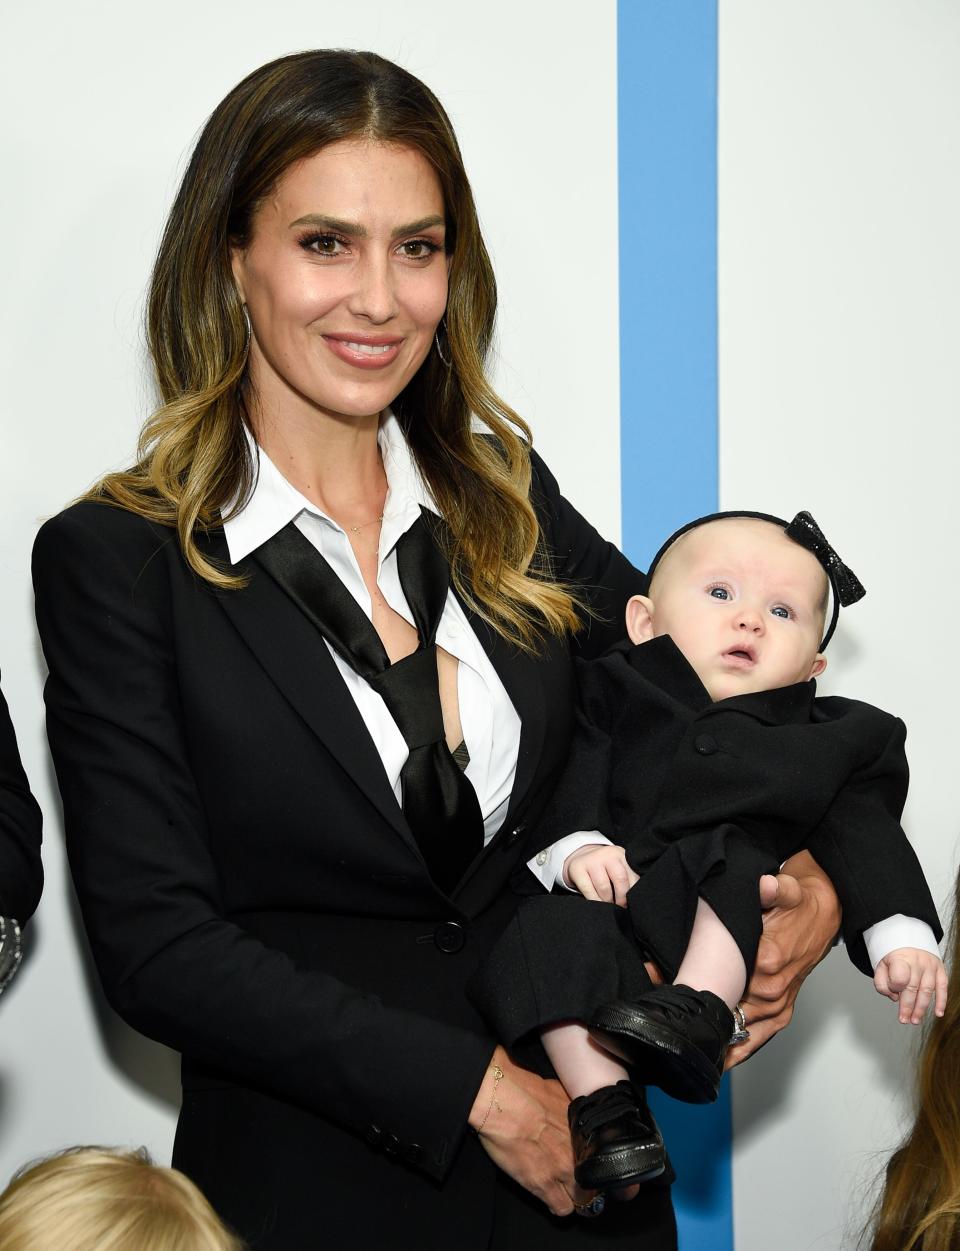 Hilaria Baldwin holds her daughter Lucia at the world premiere of "The Boss Baby: Family Business" at the SVA Theatre on Tuesday, June 22, 2021, in New York.